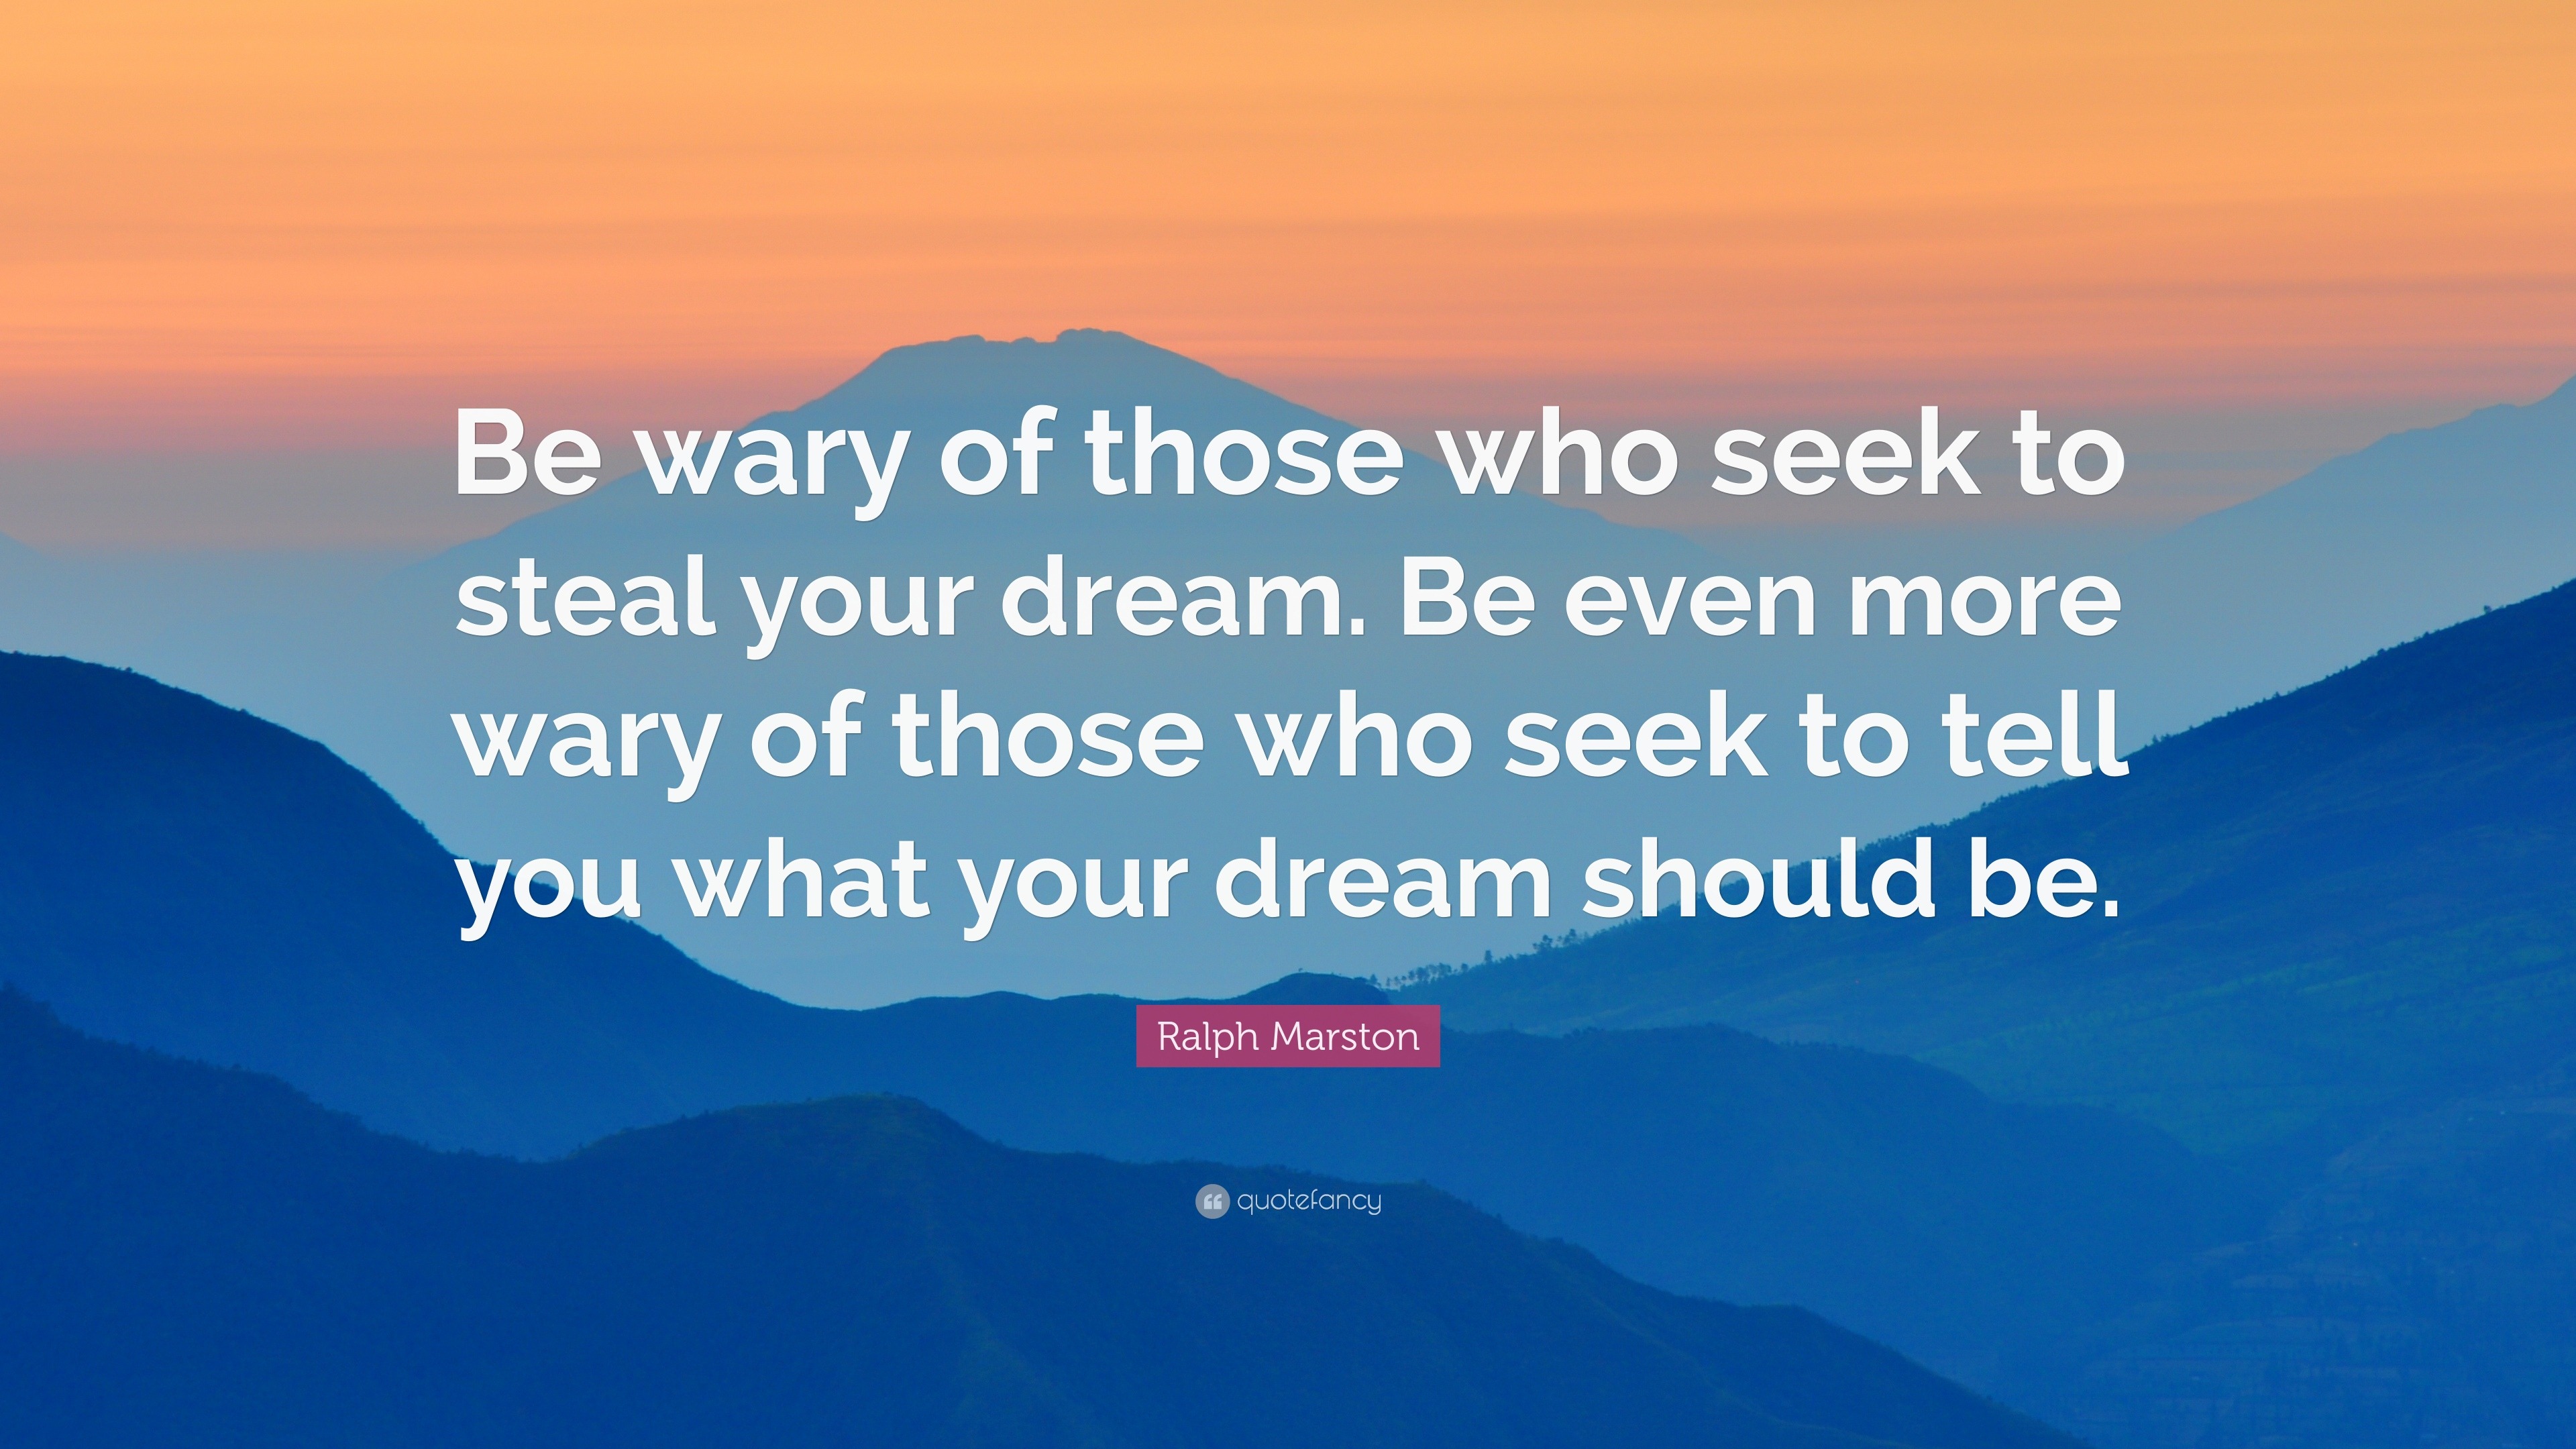 Ralph Marston Quote Be Wary Of Those Who Seek To Steal Your Dream Be Even More Wary Of Those Who Seek To Tell You What Your Dream Should Be